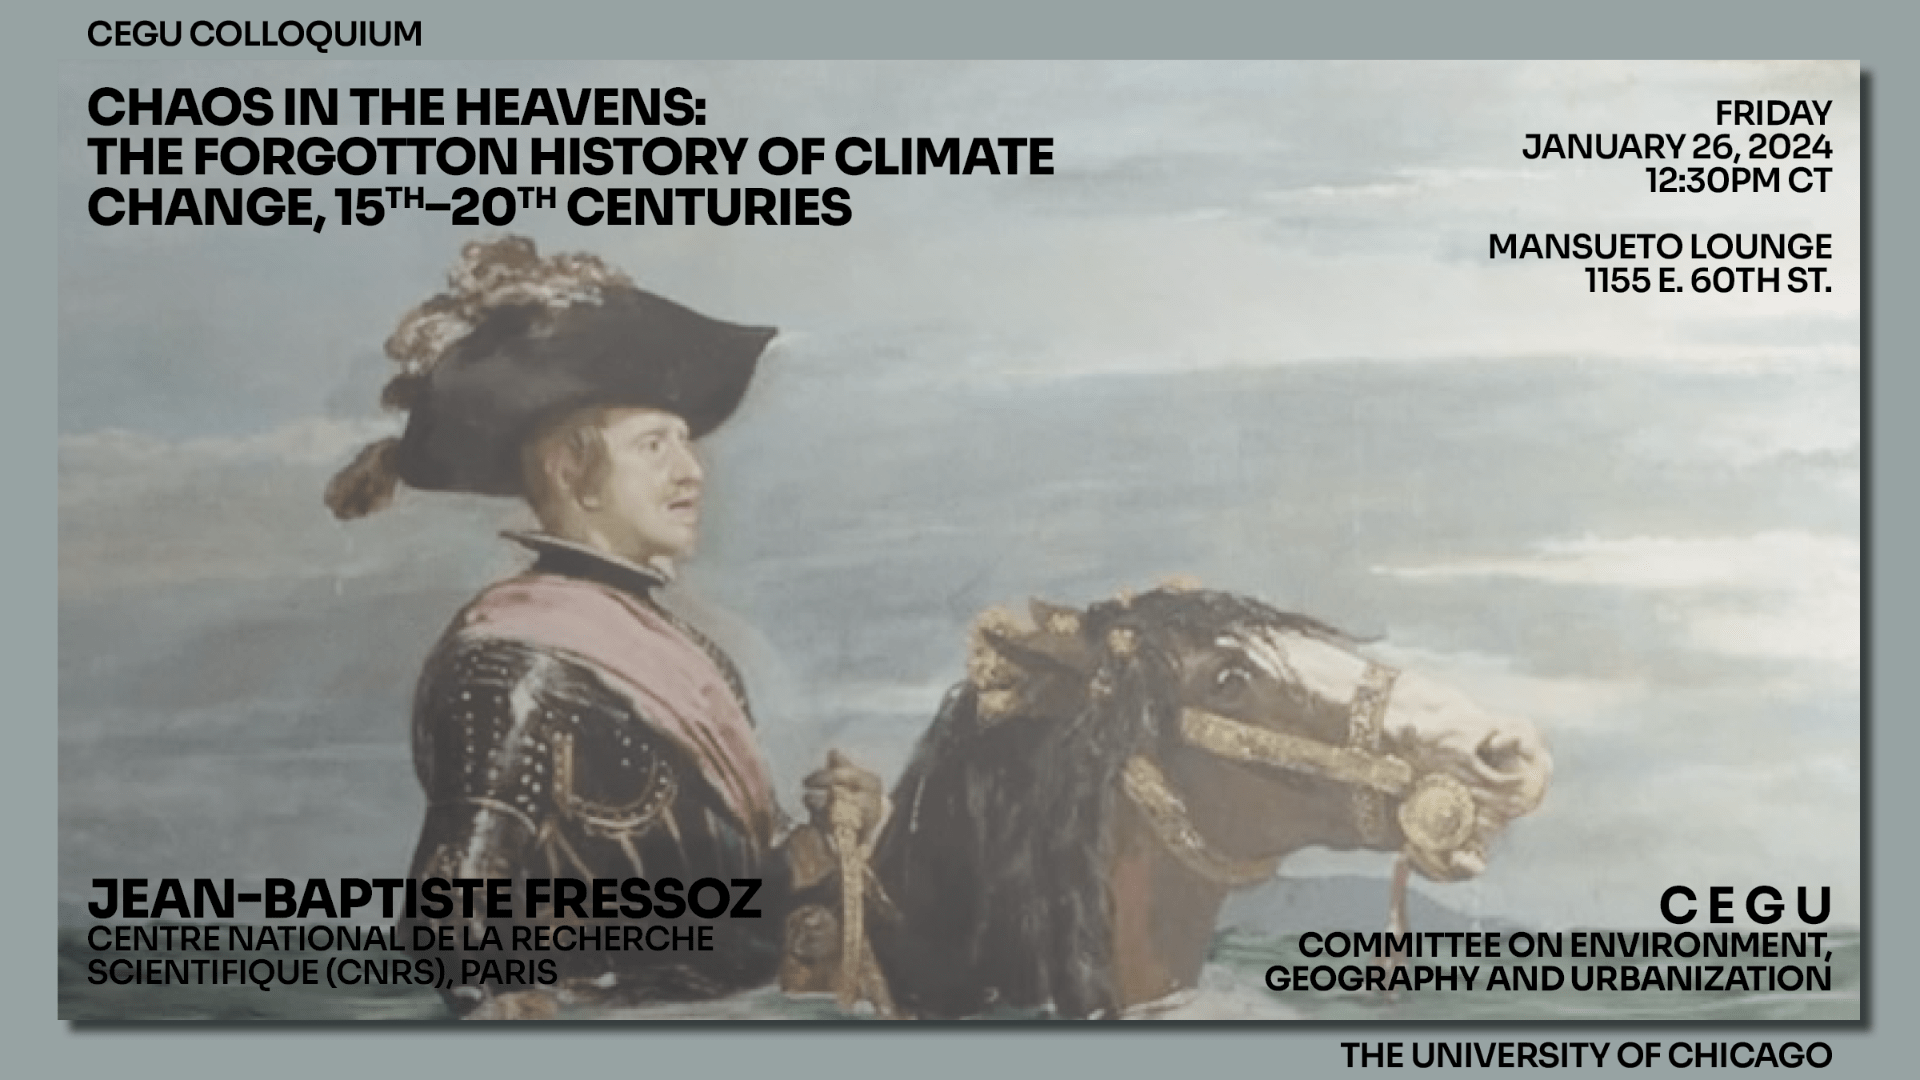 Poster for Chaos in the Heavens: The Forgotton History of Climate Change, 15th-20th Centuries; January 2024 CEGU Colloquium with Jean-Baptiste Fressoz